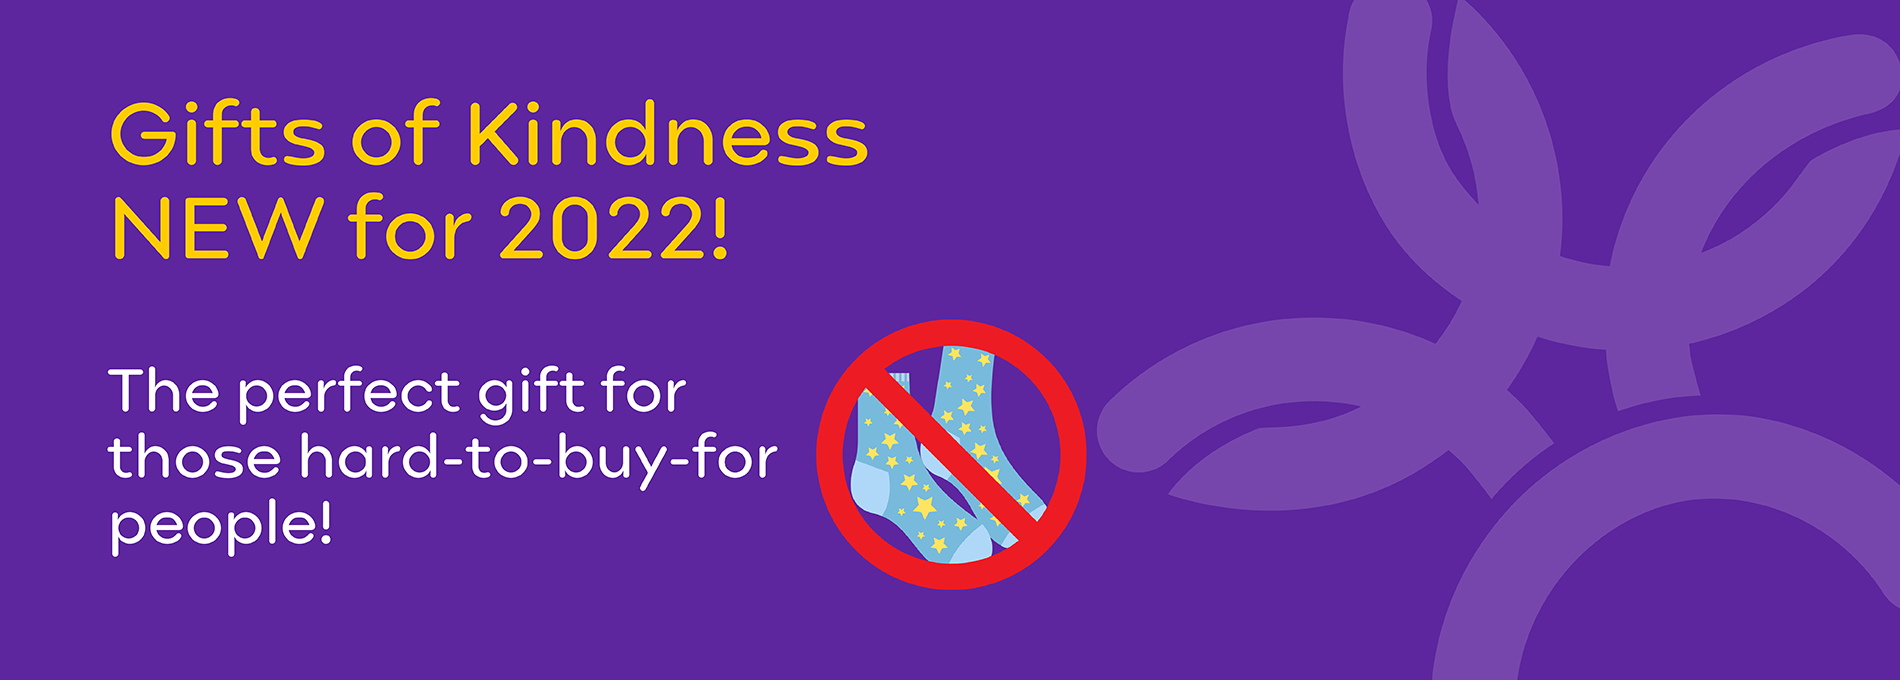 Gifts of Kindness banner